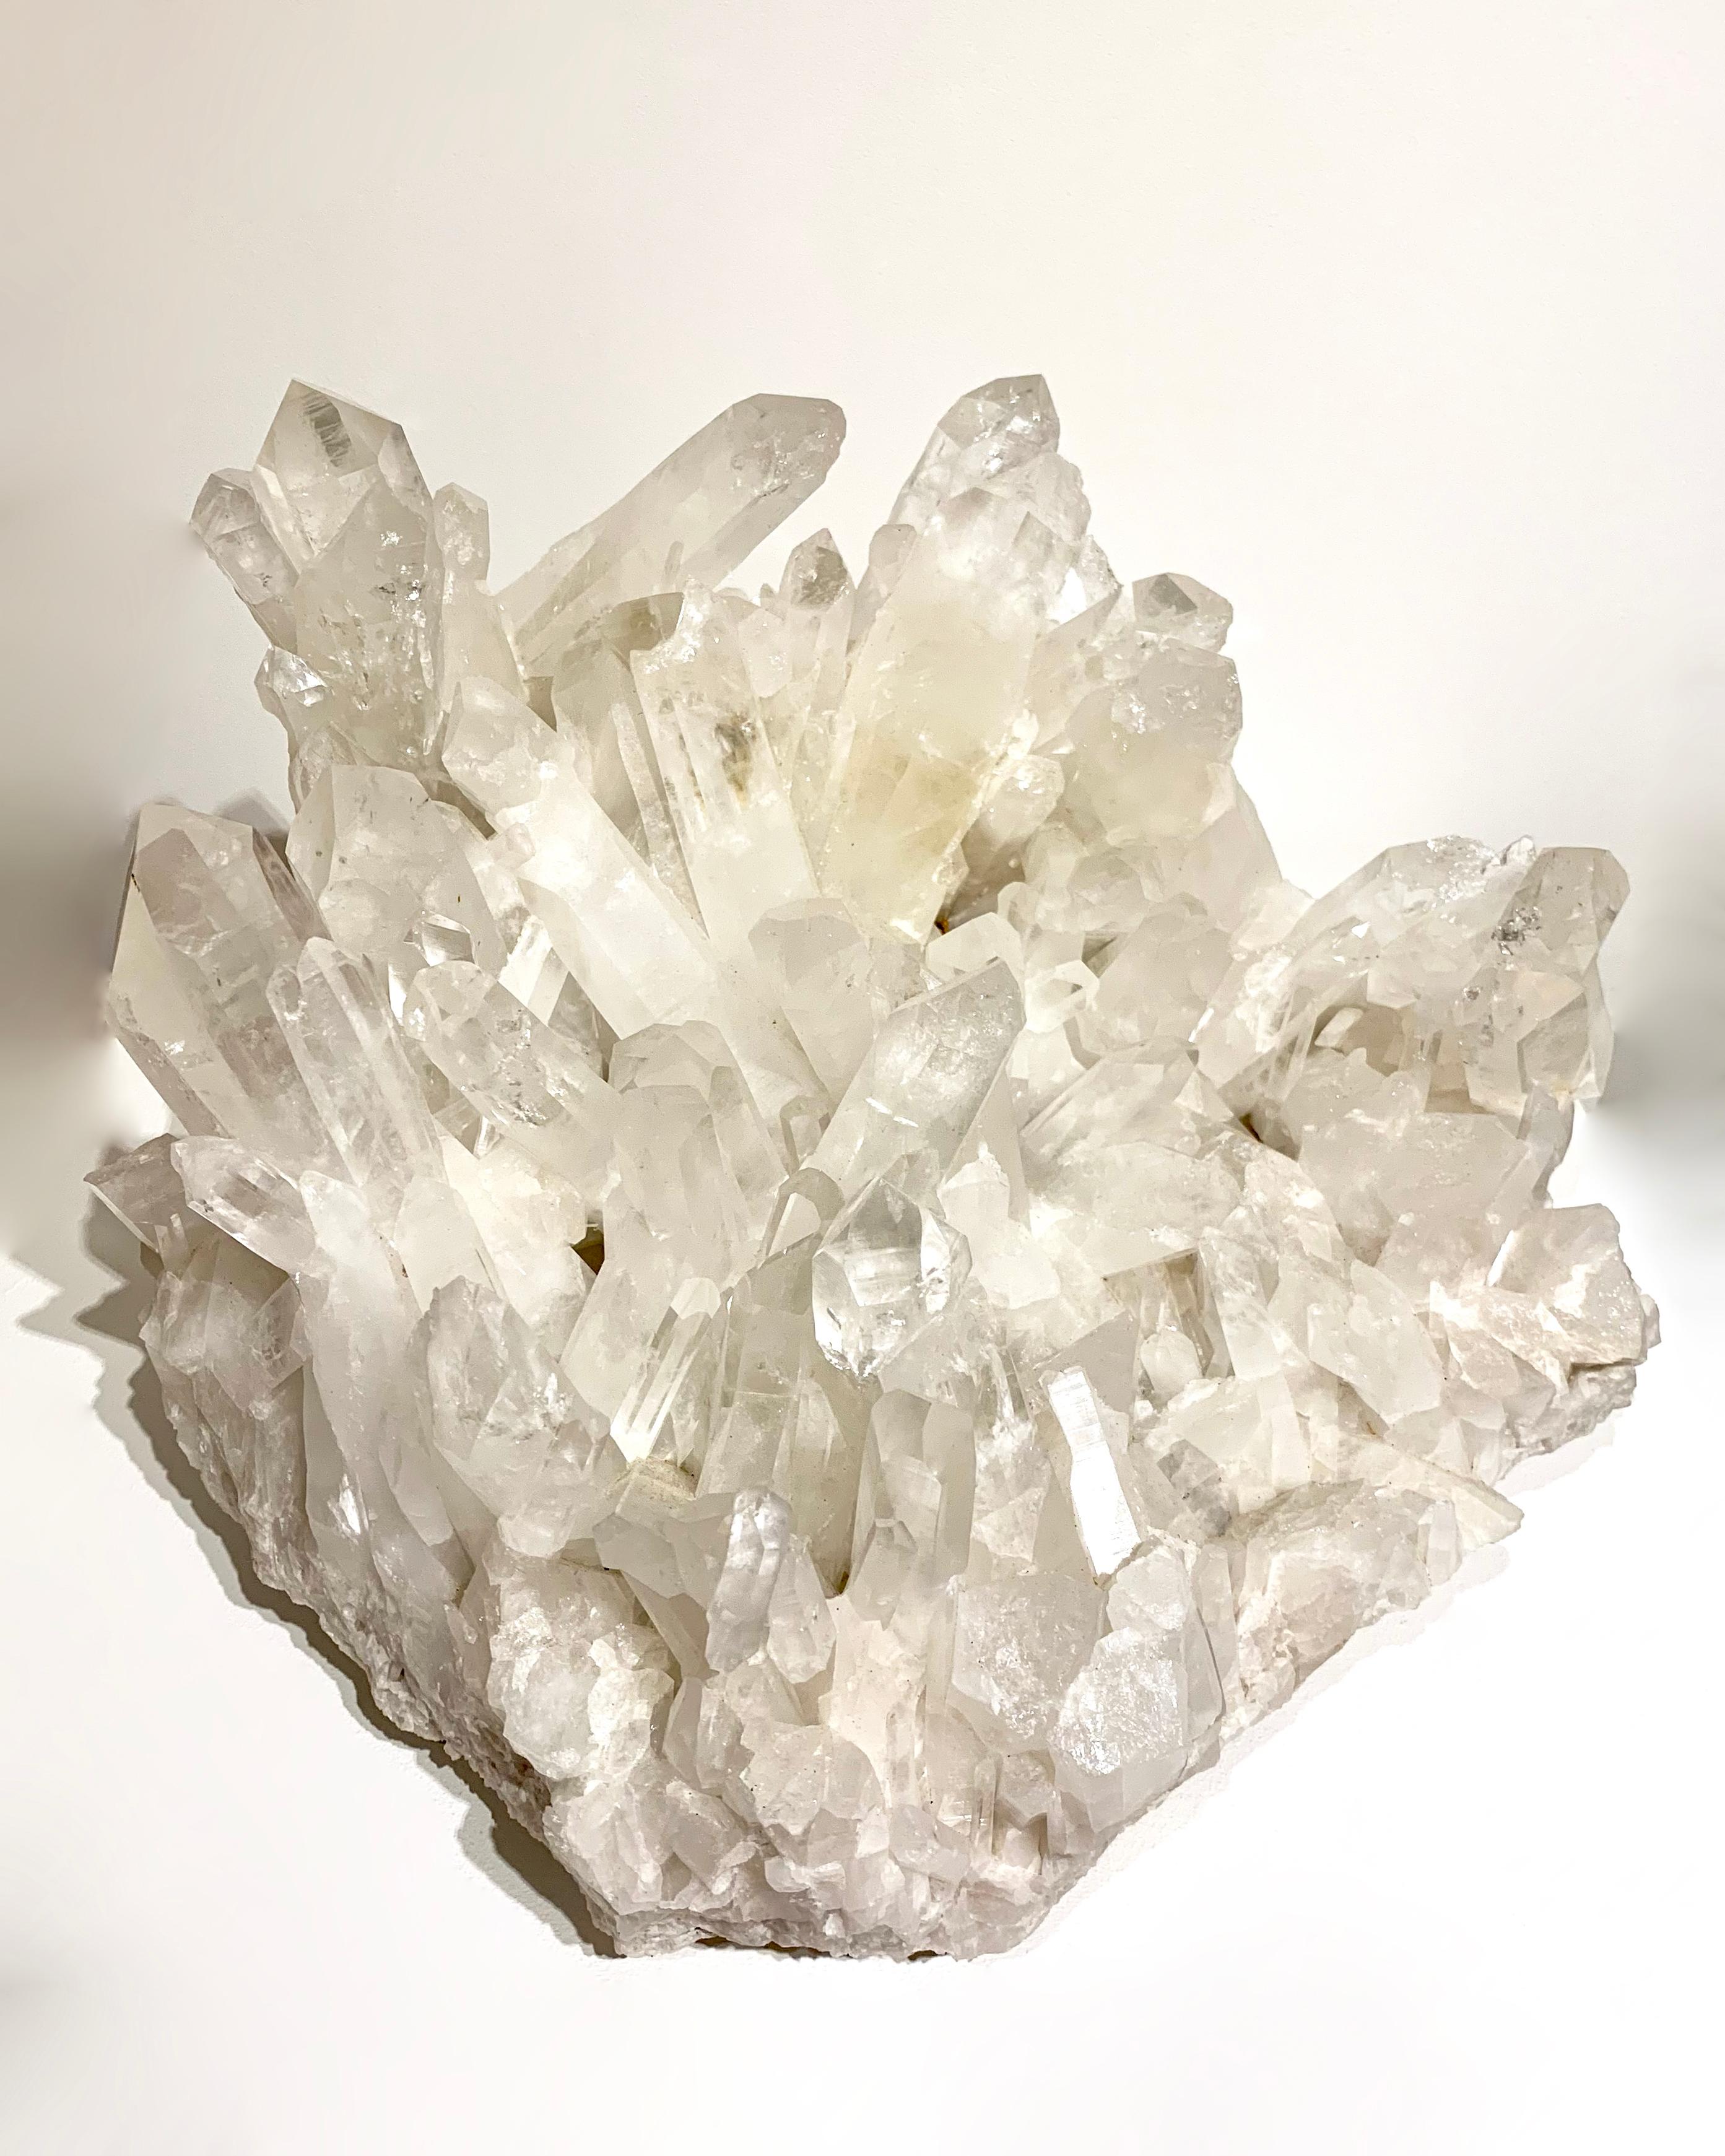 Quartz crystal cluster from Colombia. Circa 50 million years old

Natural History. From rare dinosaur skulls and Stone Age tools to the world’s earliest animals that date back millions of years, the Extraordinary Objects collection of natural